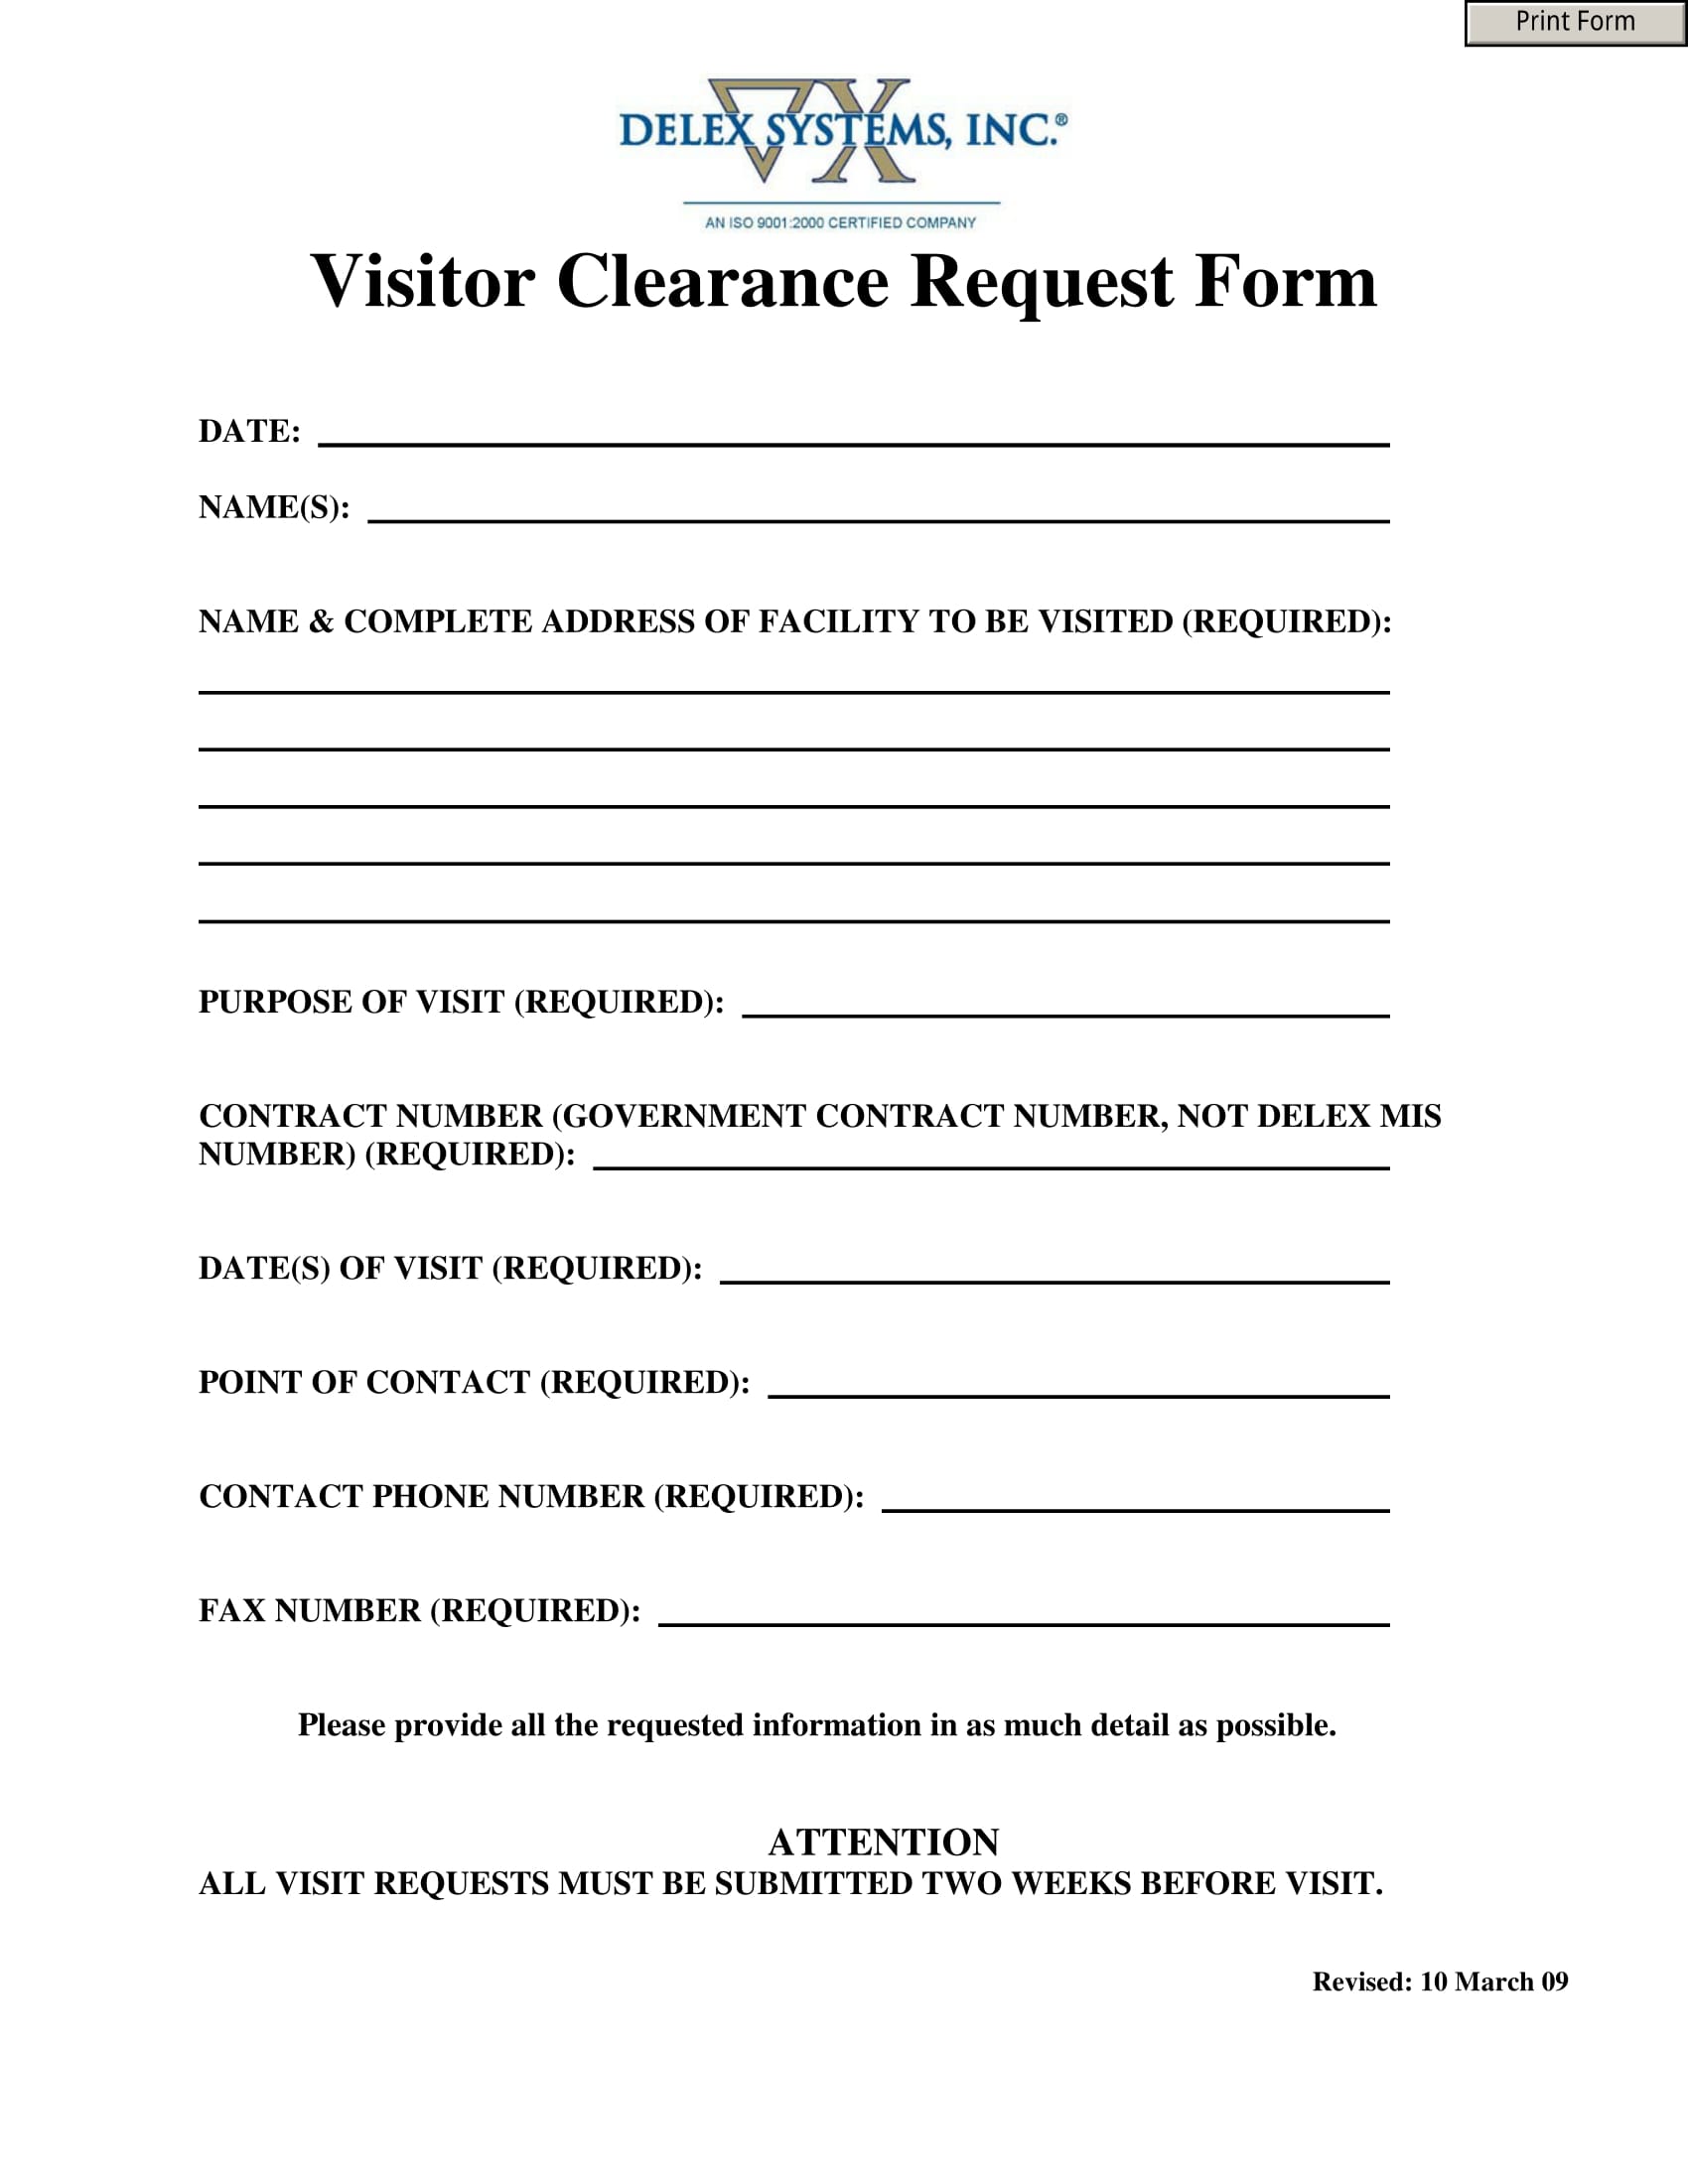 visitor clearance request form 1